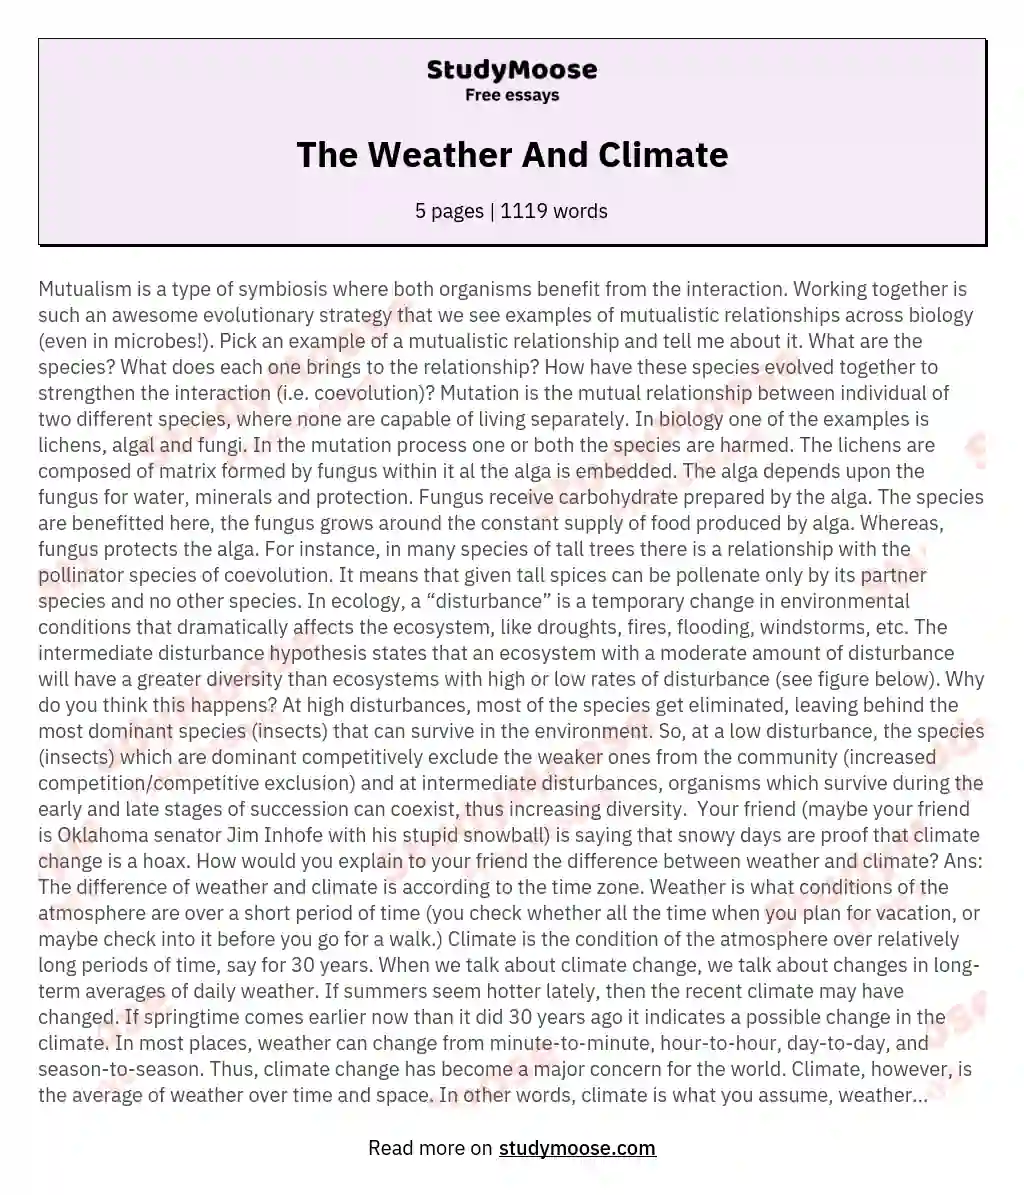 The Weather And Climate essay